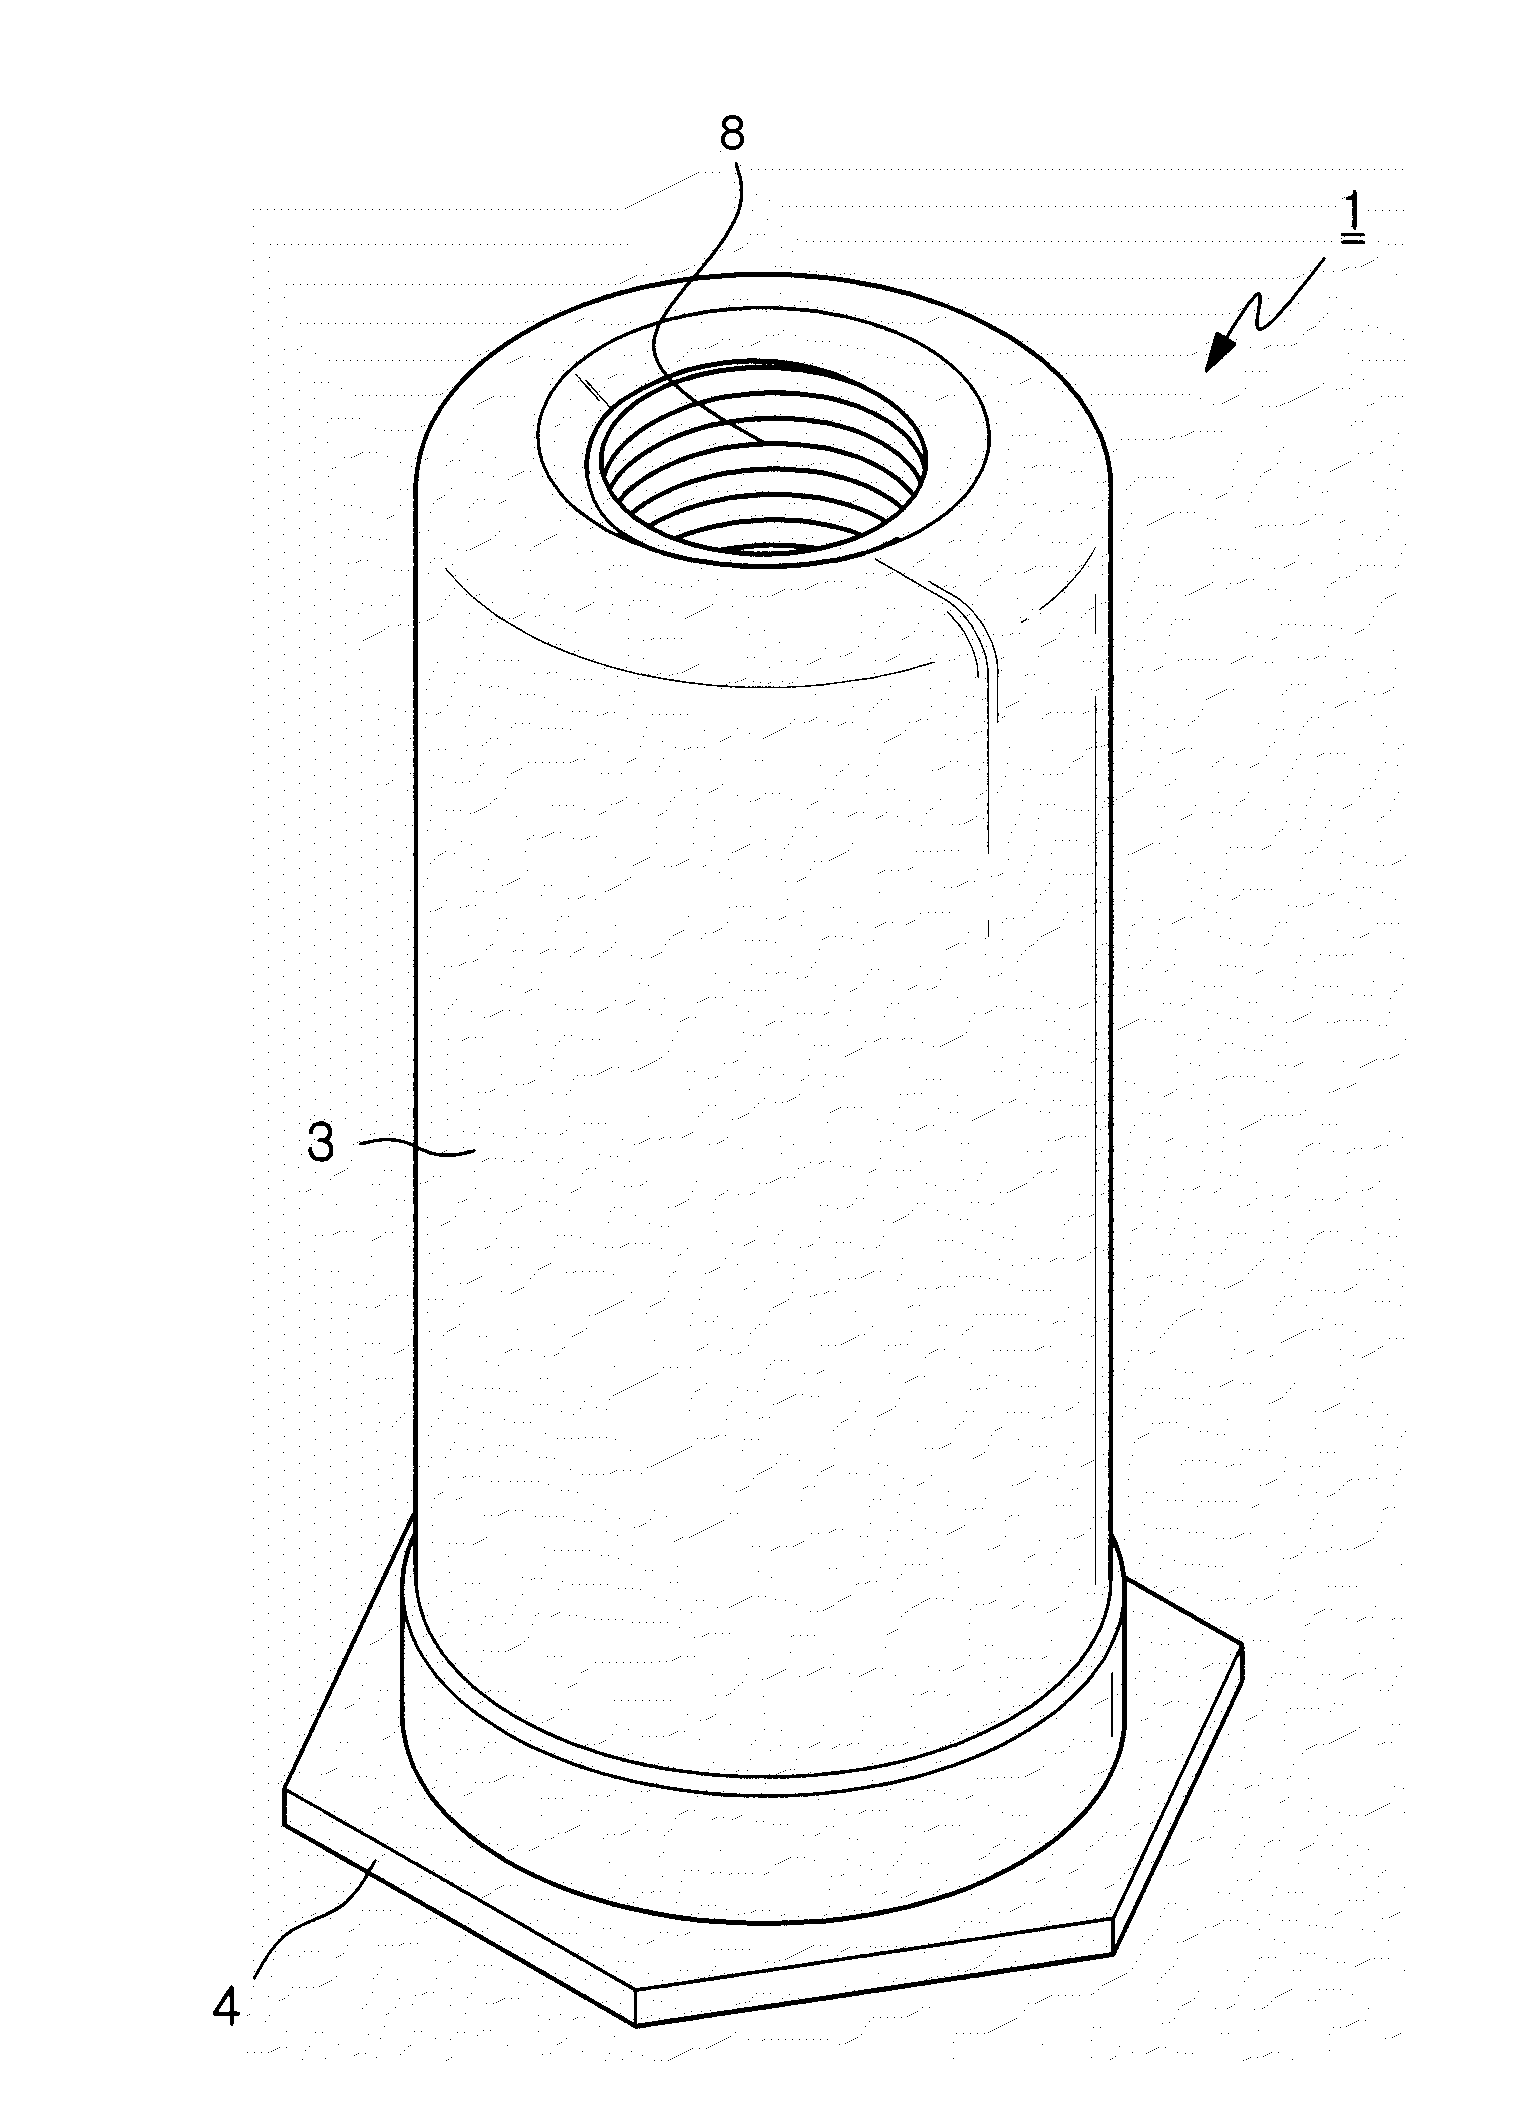 Coupling boss and method for fabricating the same